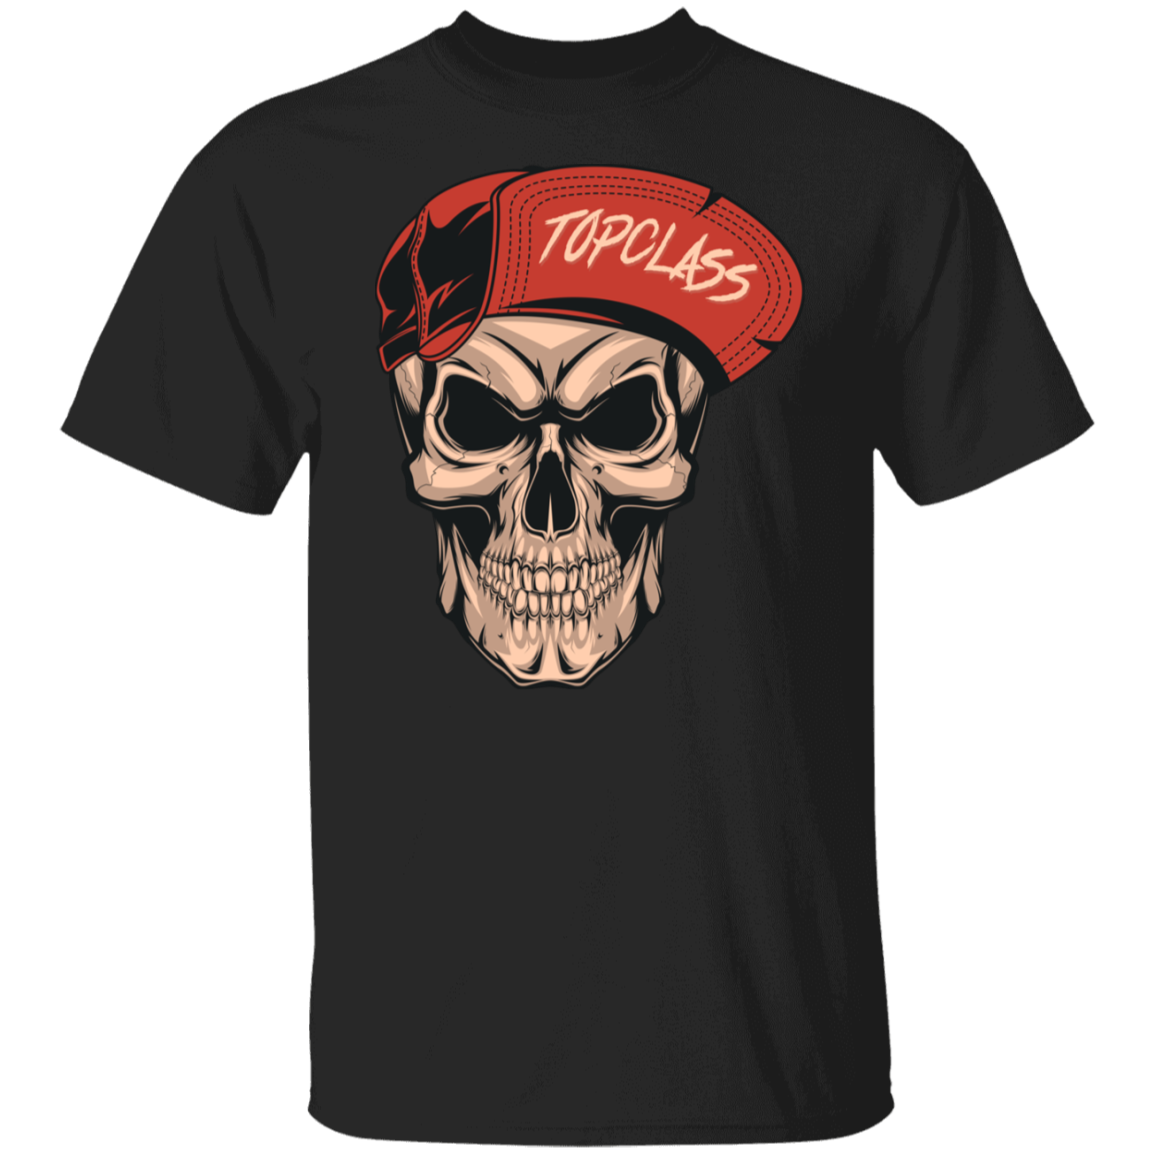 Topclass Skull with Red Hat Tshirt